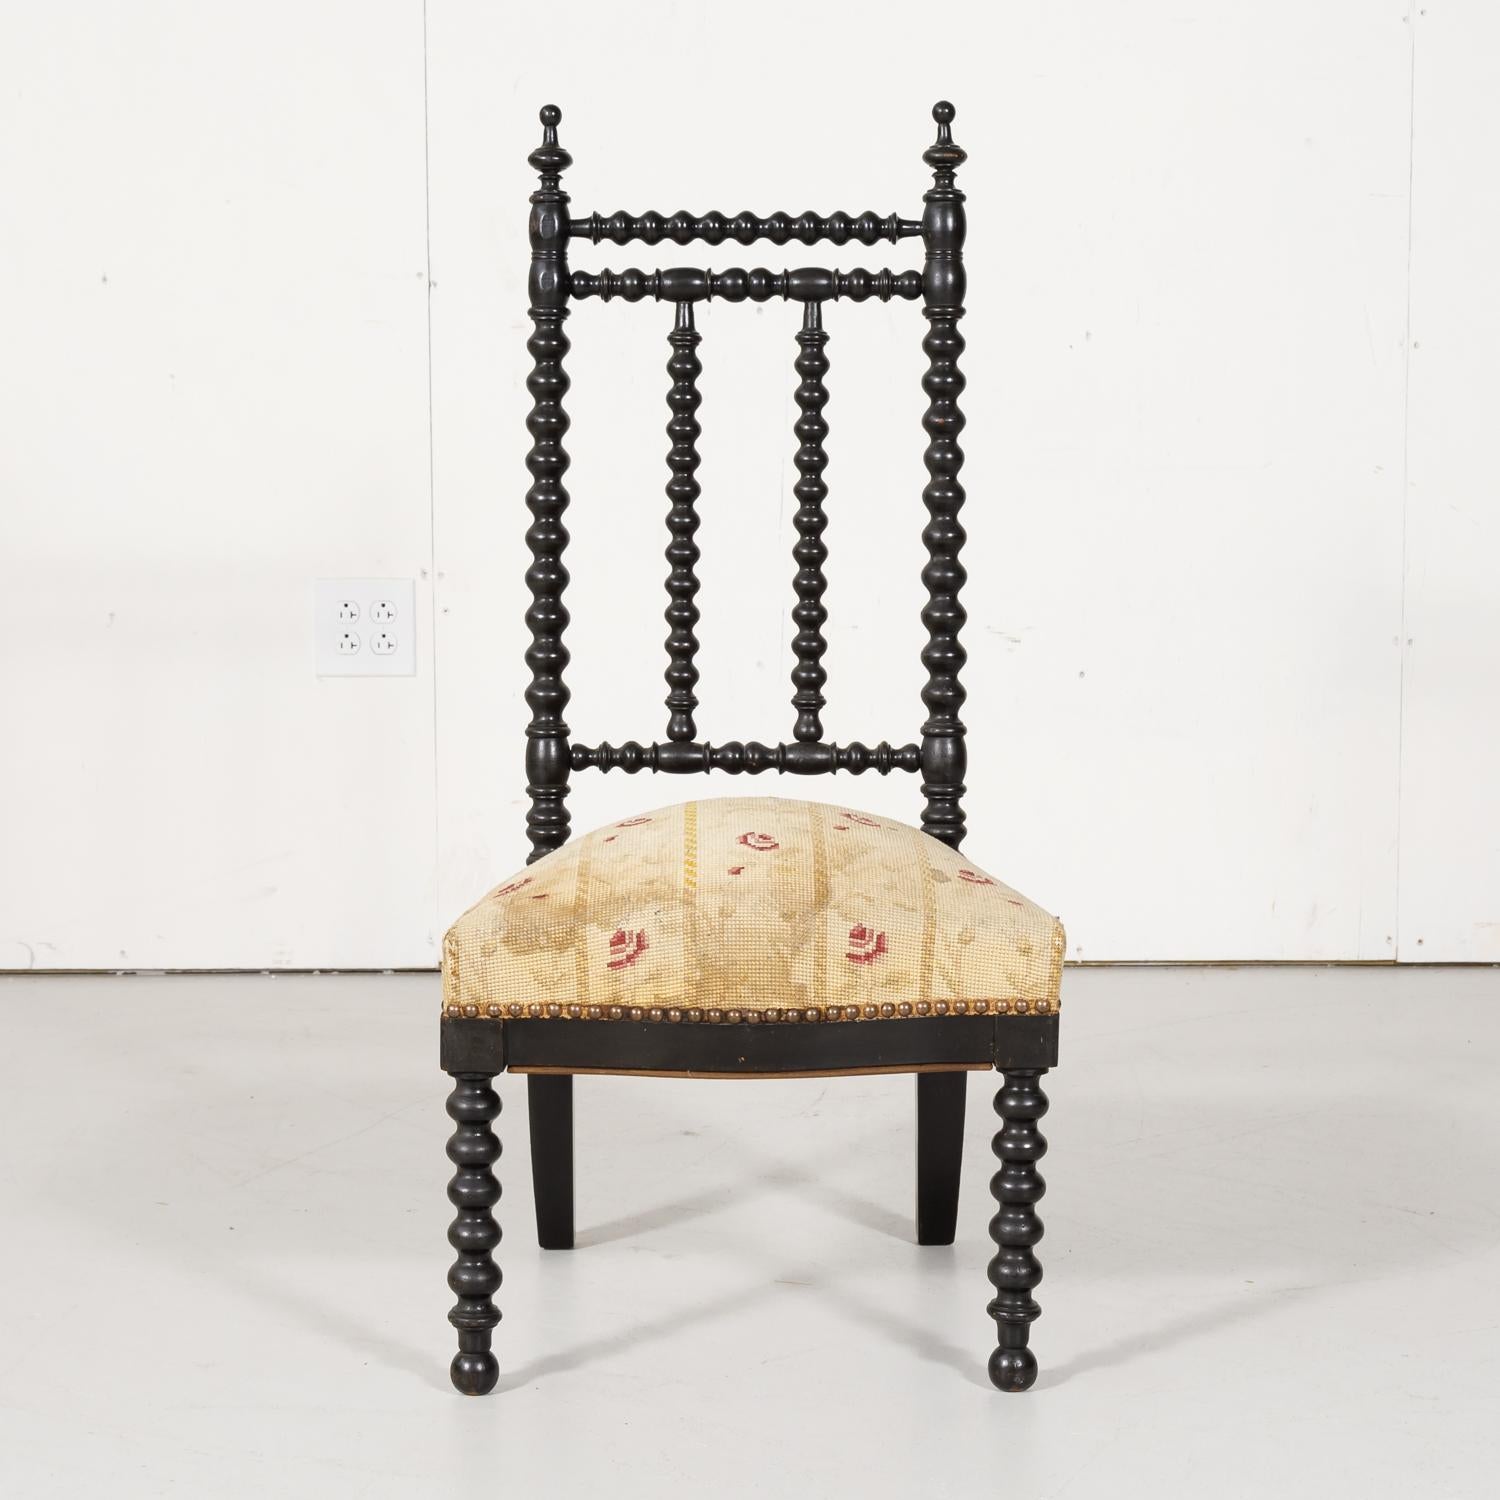 19th century French Napoleon III ebonized bobbin nursing side chair circa 1850s, having a turned wooden bobbin frame with turned finials above an upholstered seat, raised on front bobbin legs and saber back legs. Low seated chairs like these were